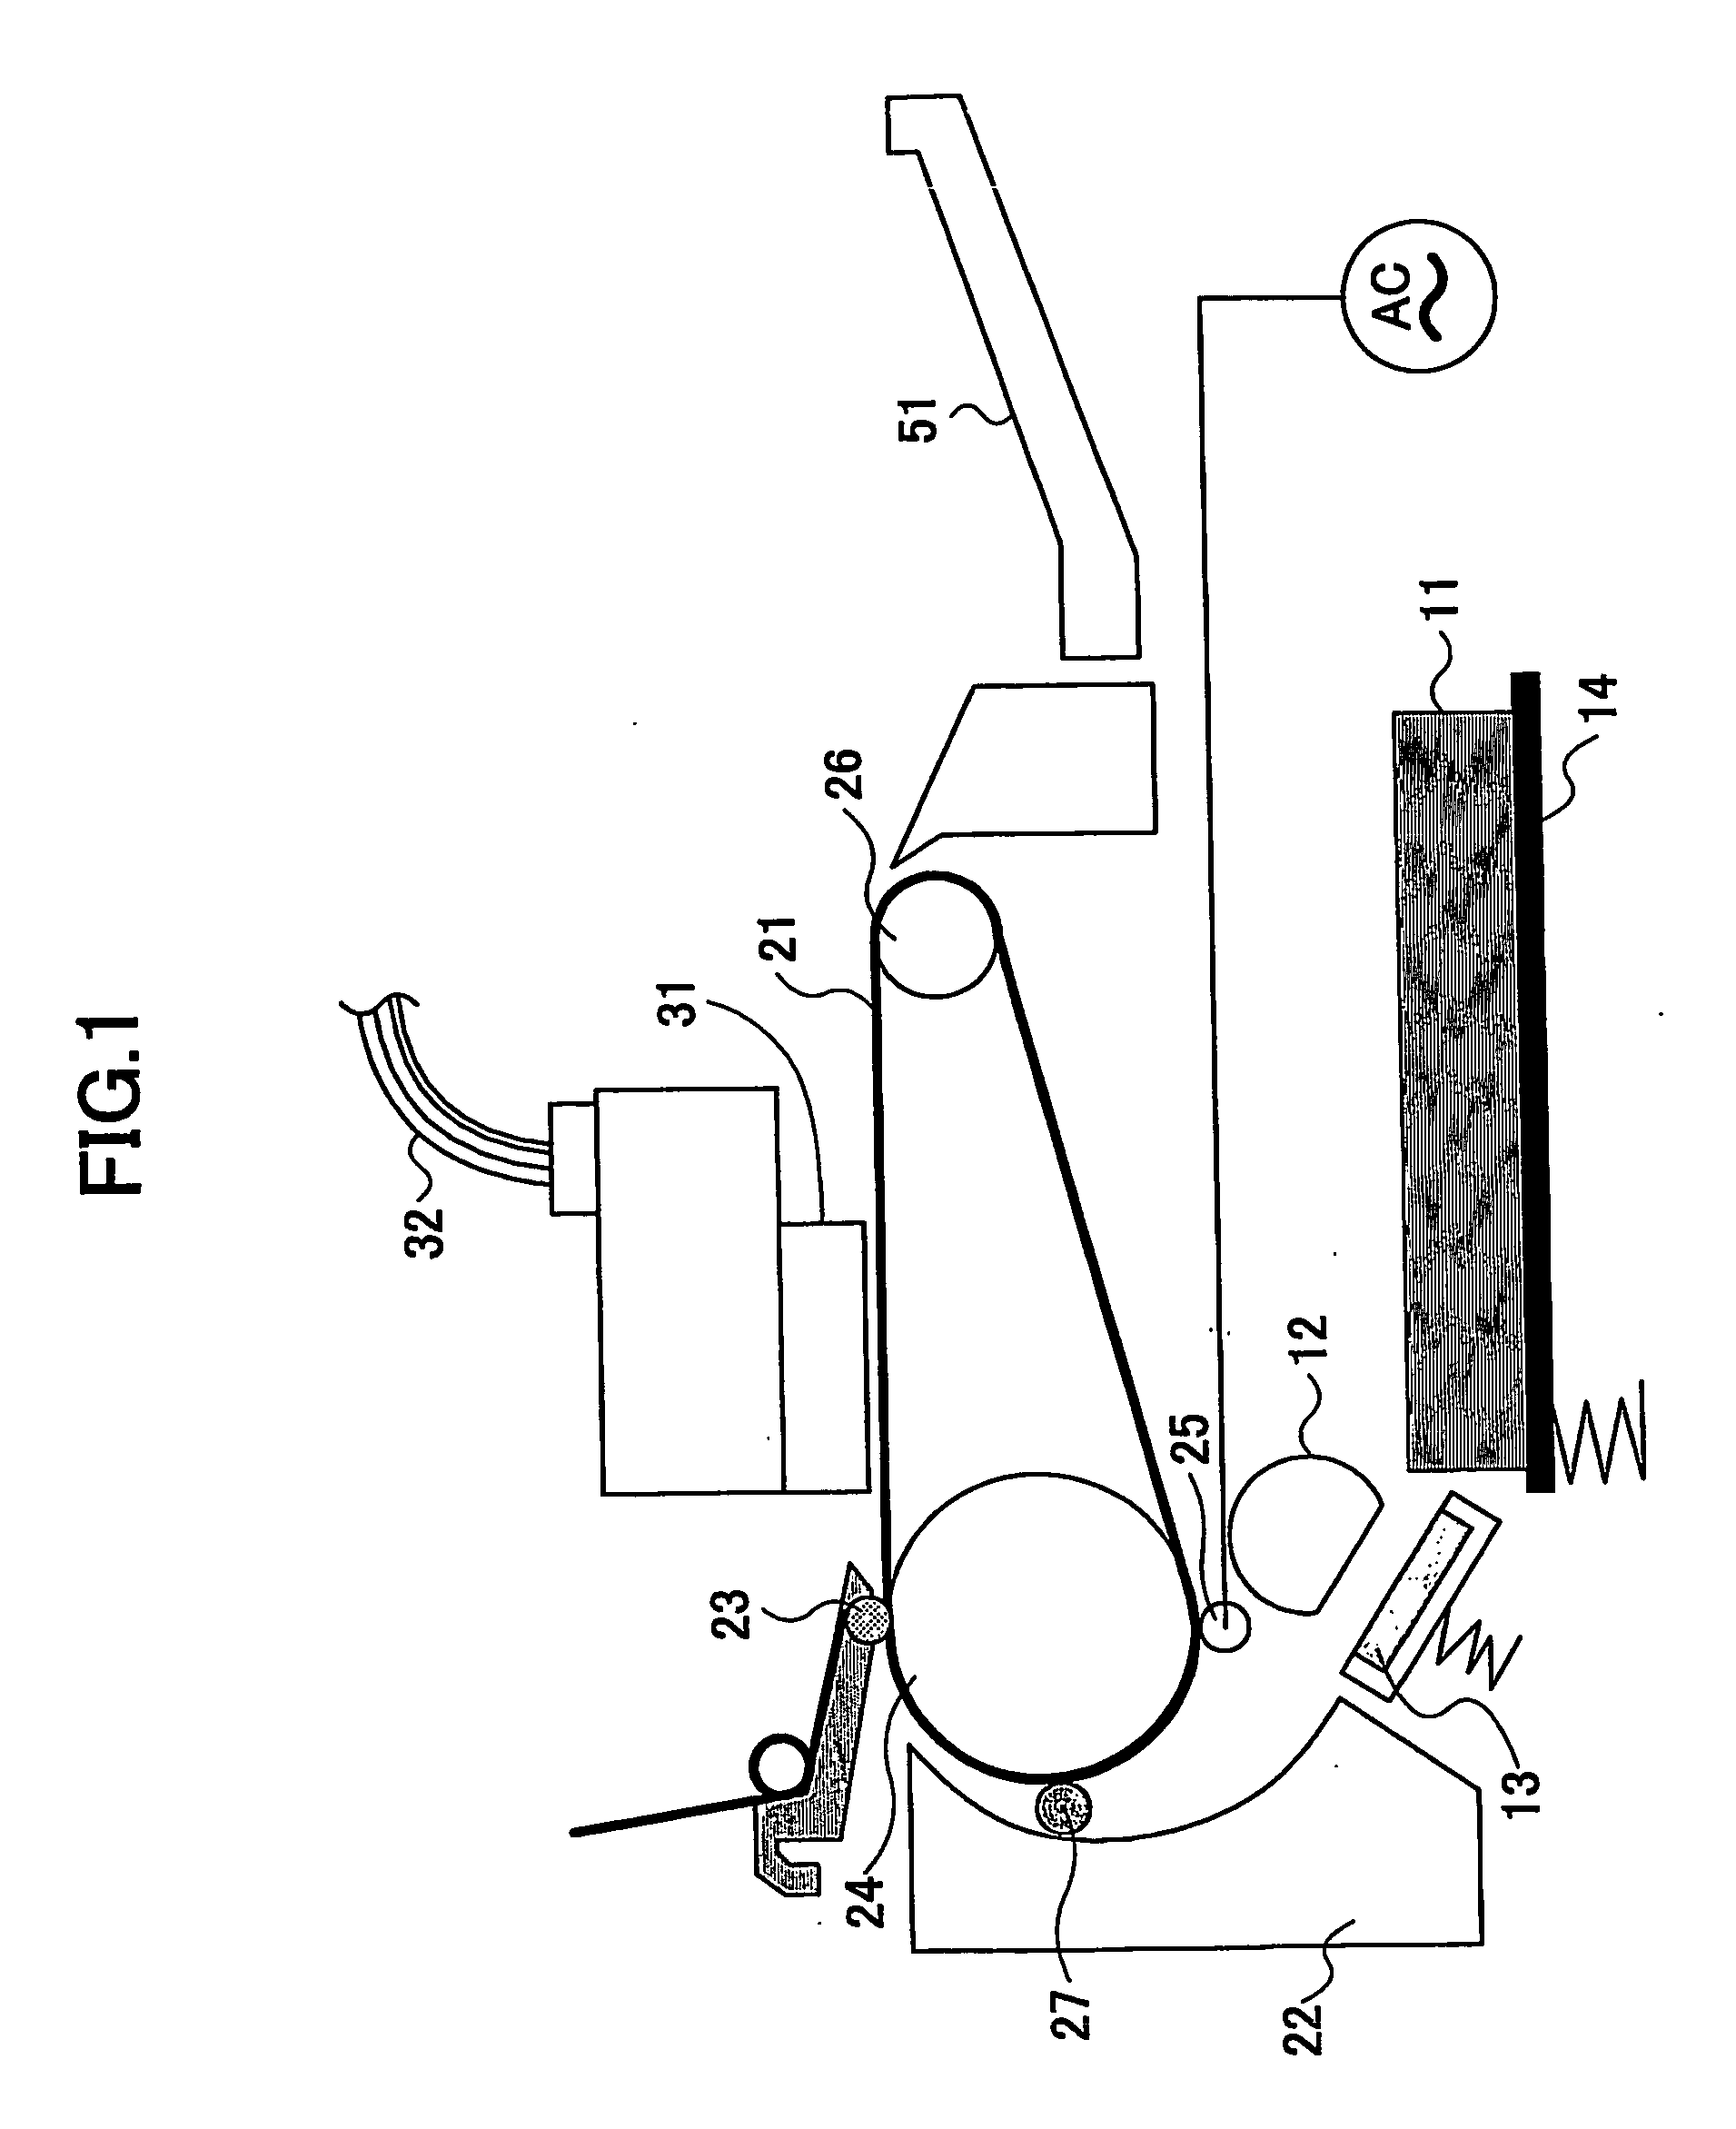 Ink-jet recording method and recording medium used therein